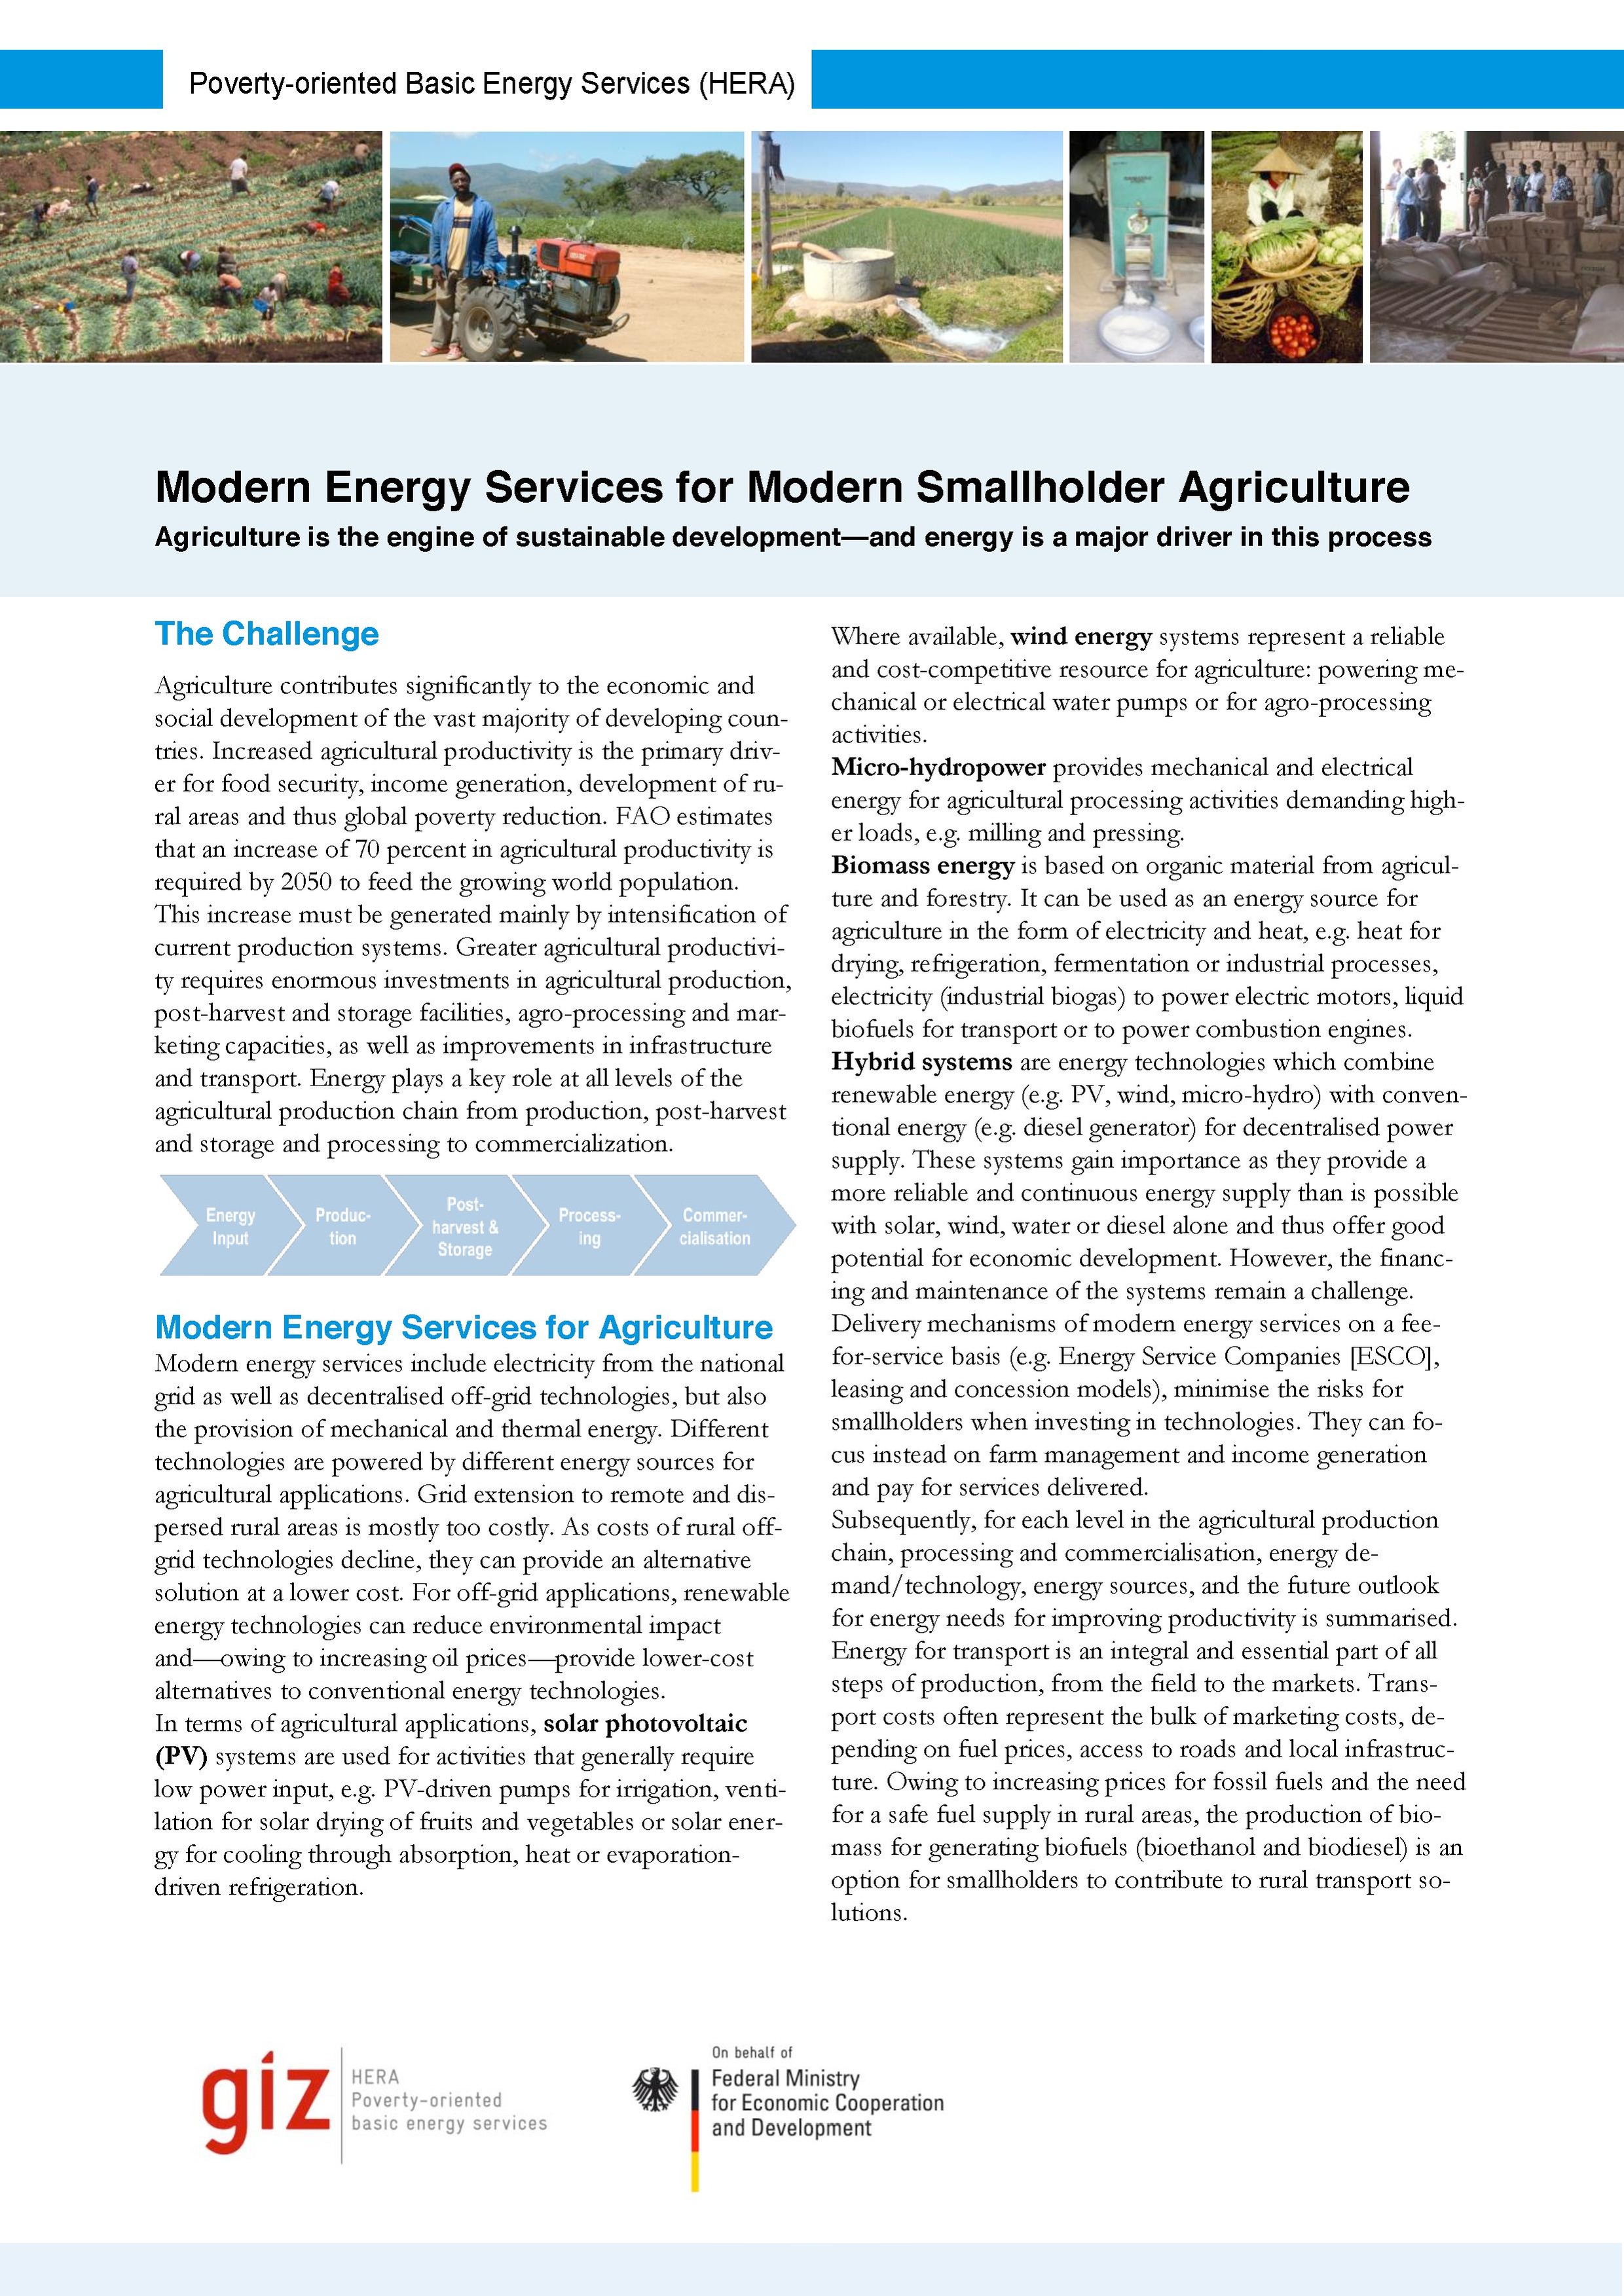 GIZ HERA: Modern Energy Services for Modern Agriculture